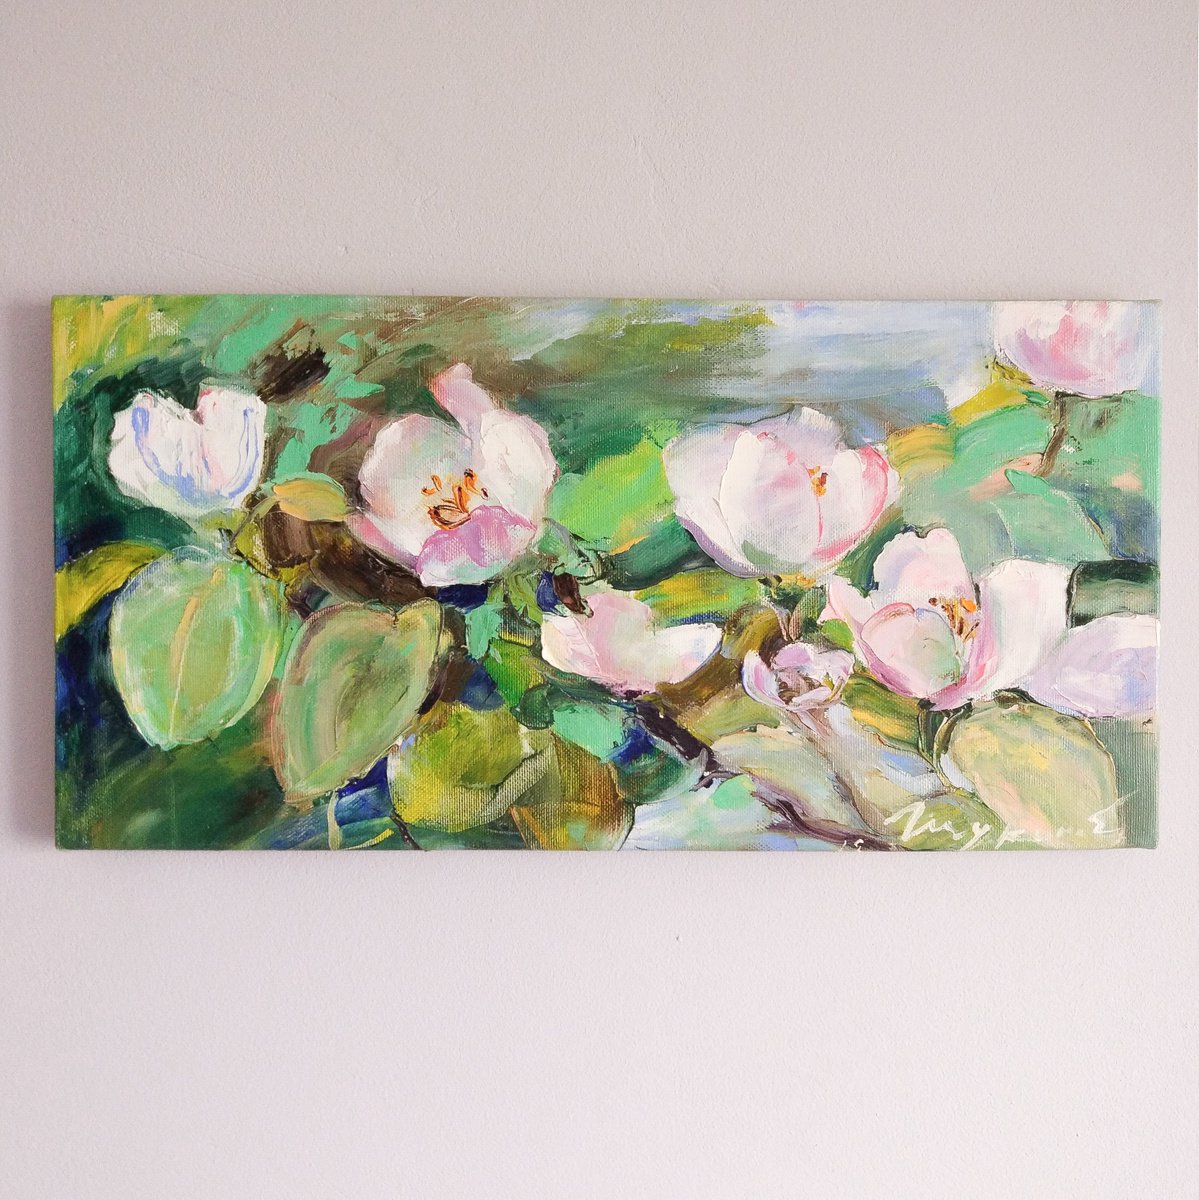 Flowering branch. Quince. July. Original oil painting (2018) by Helen Shukina